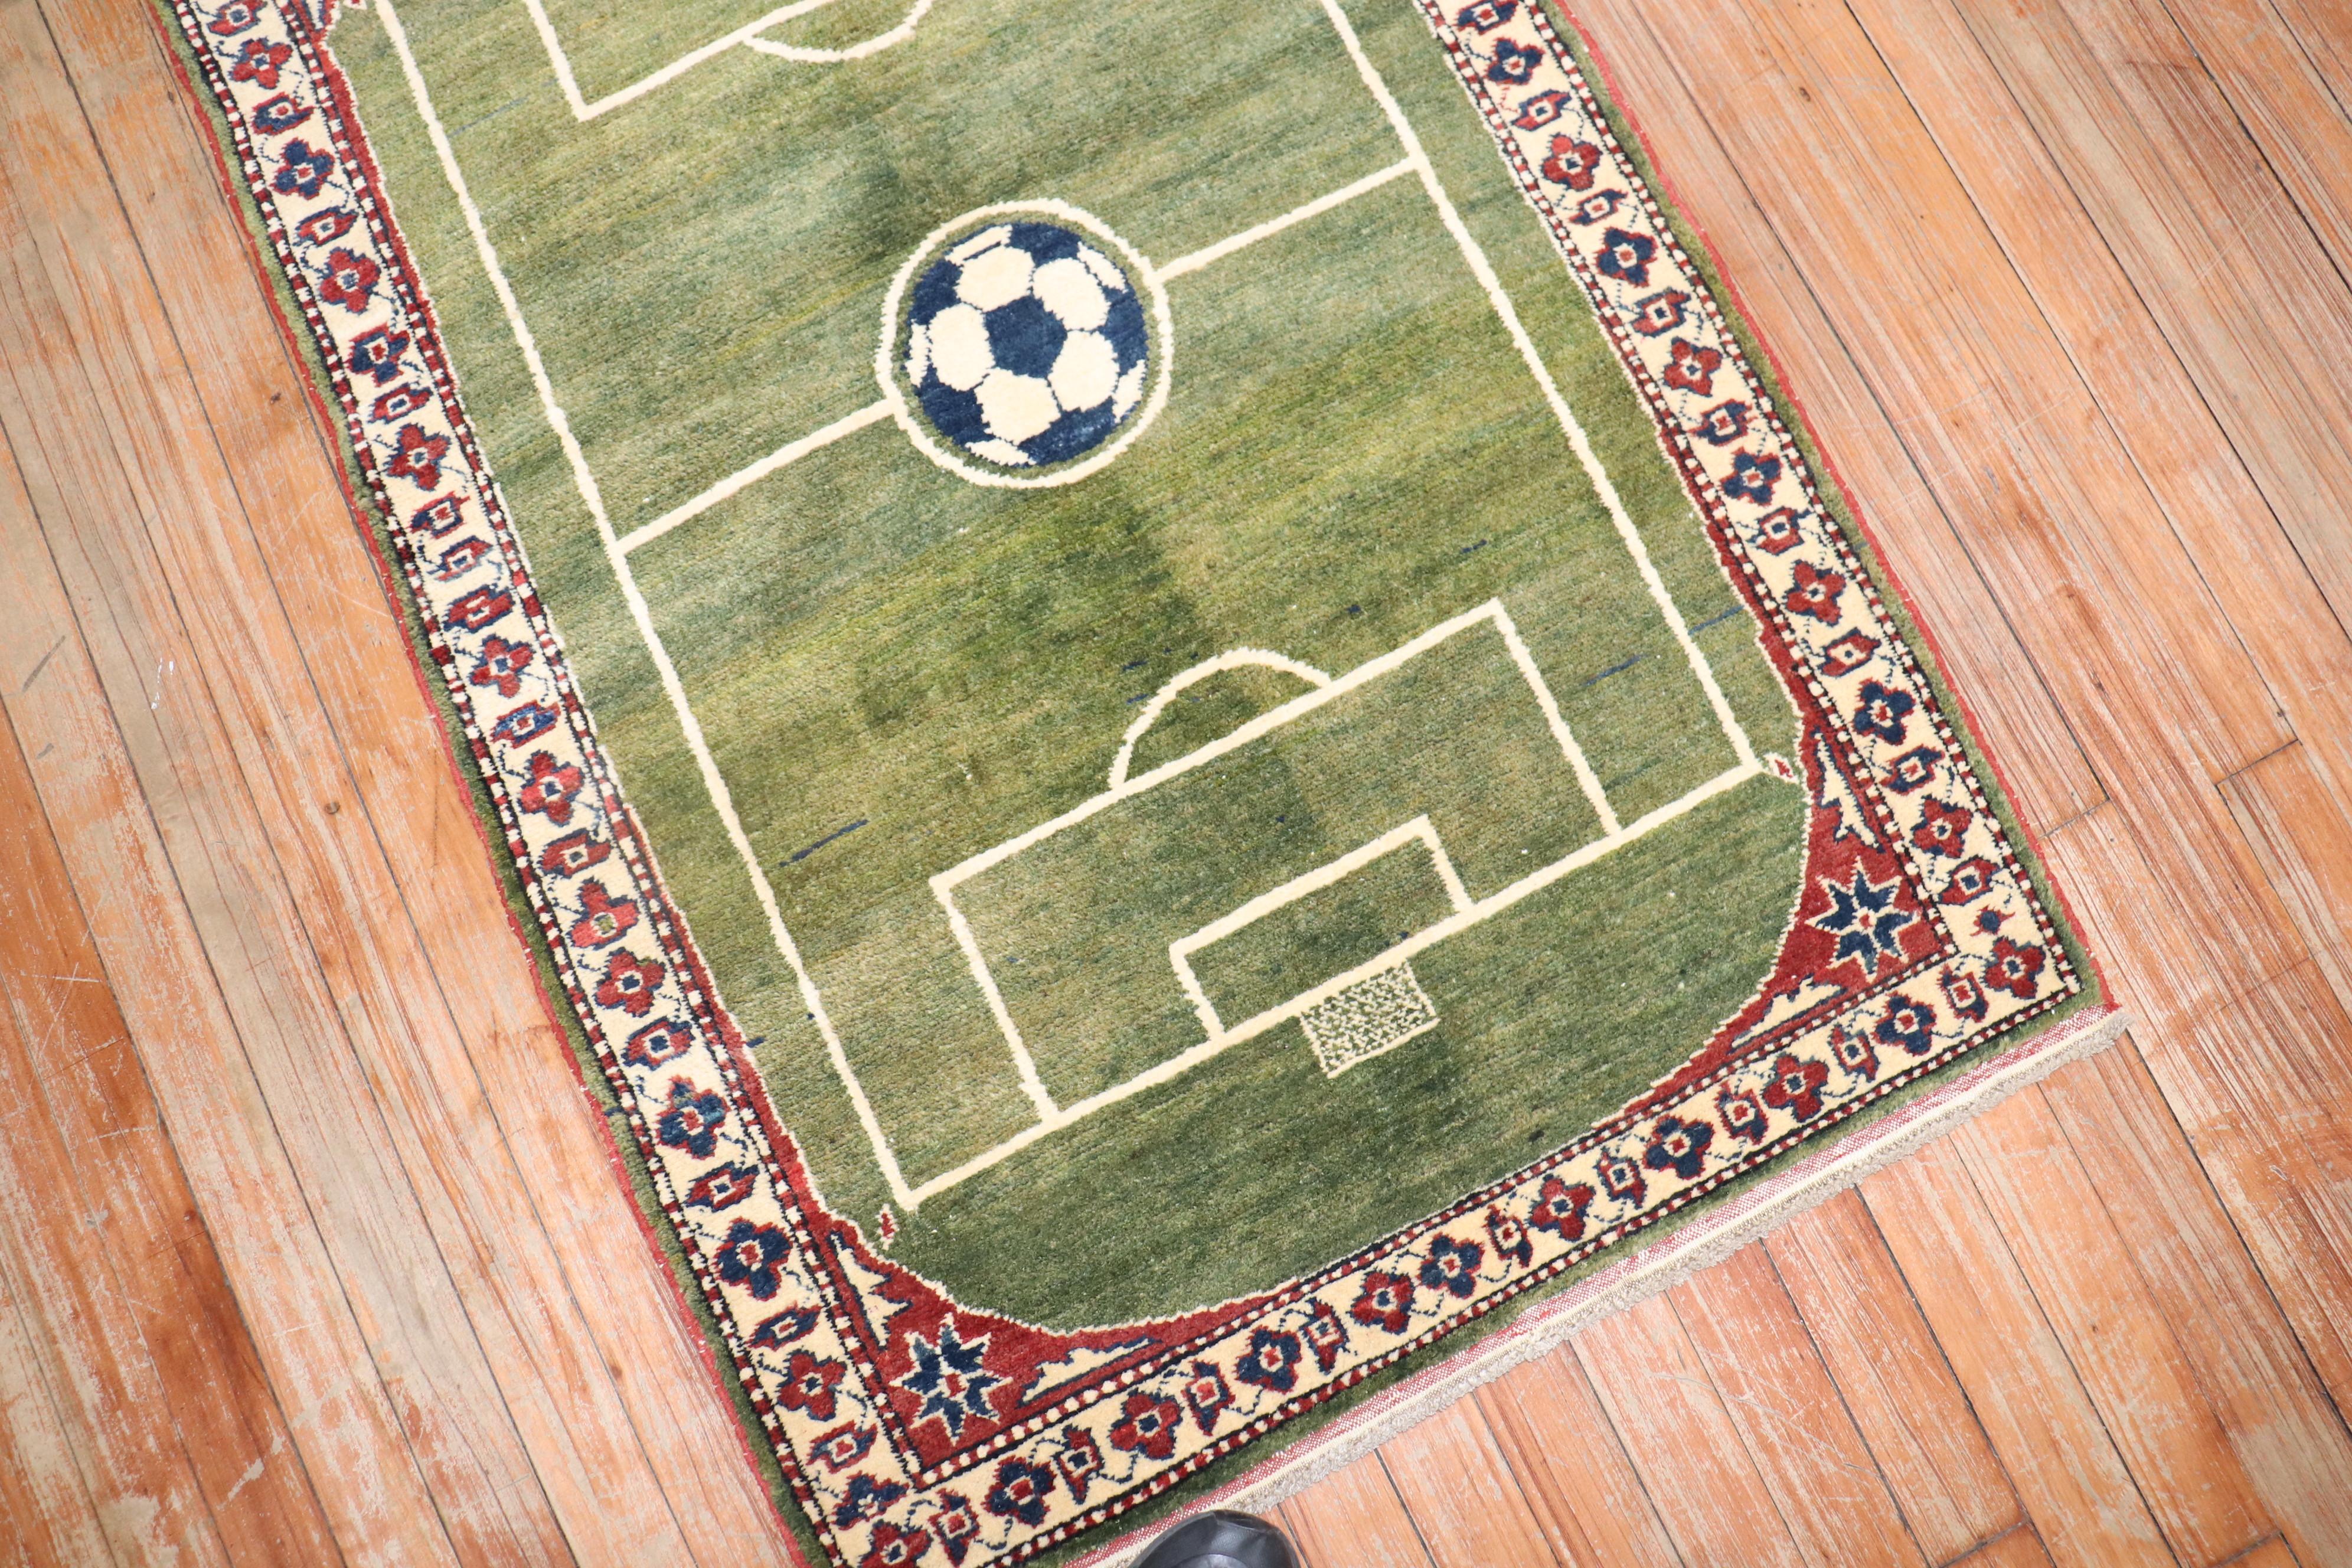 21st Century Soccer Stadium Pattern Rug In Excellent Condition For Sale In New York, NY